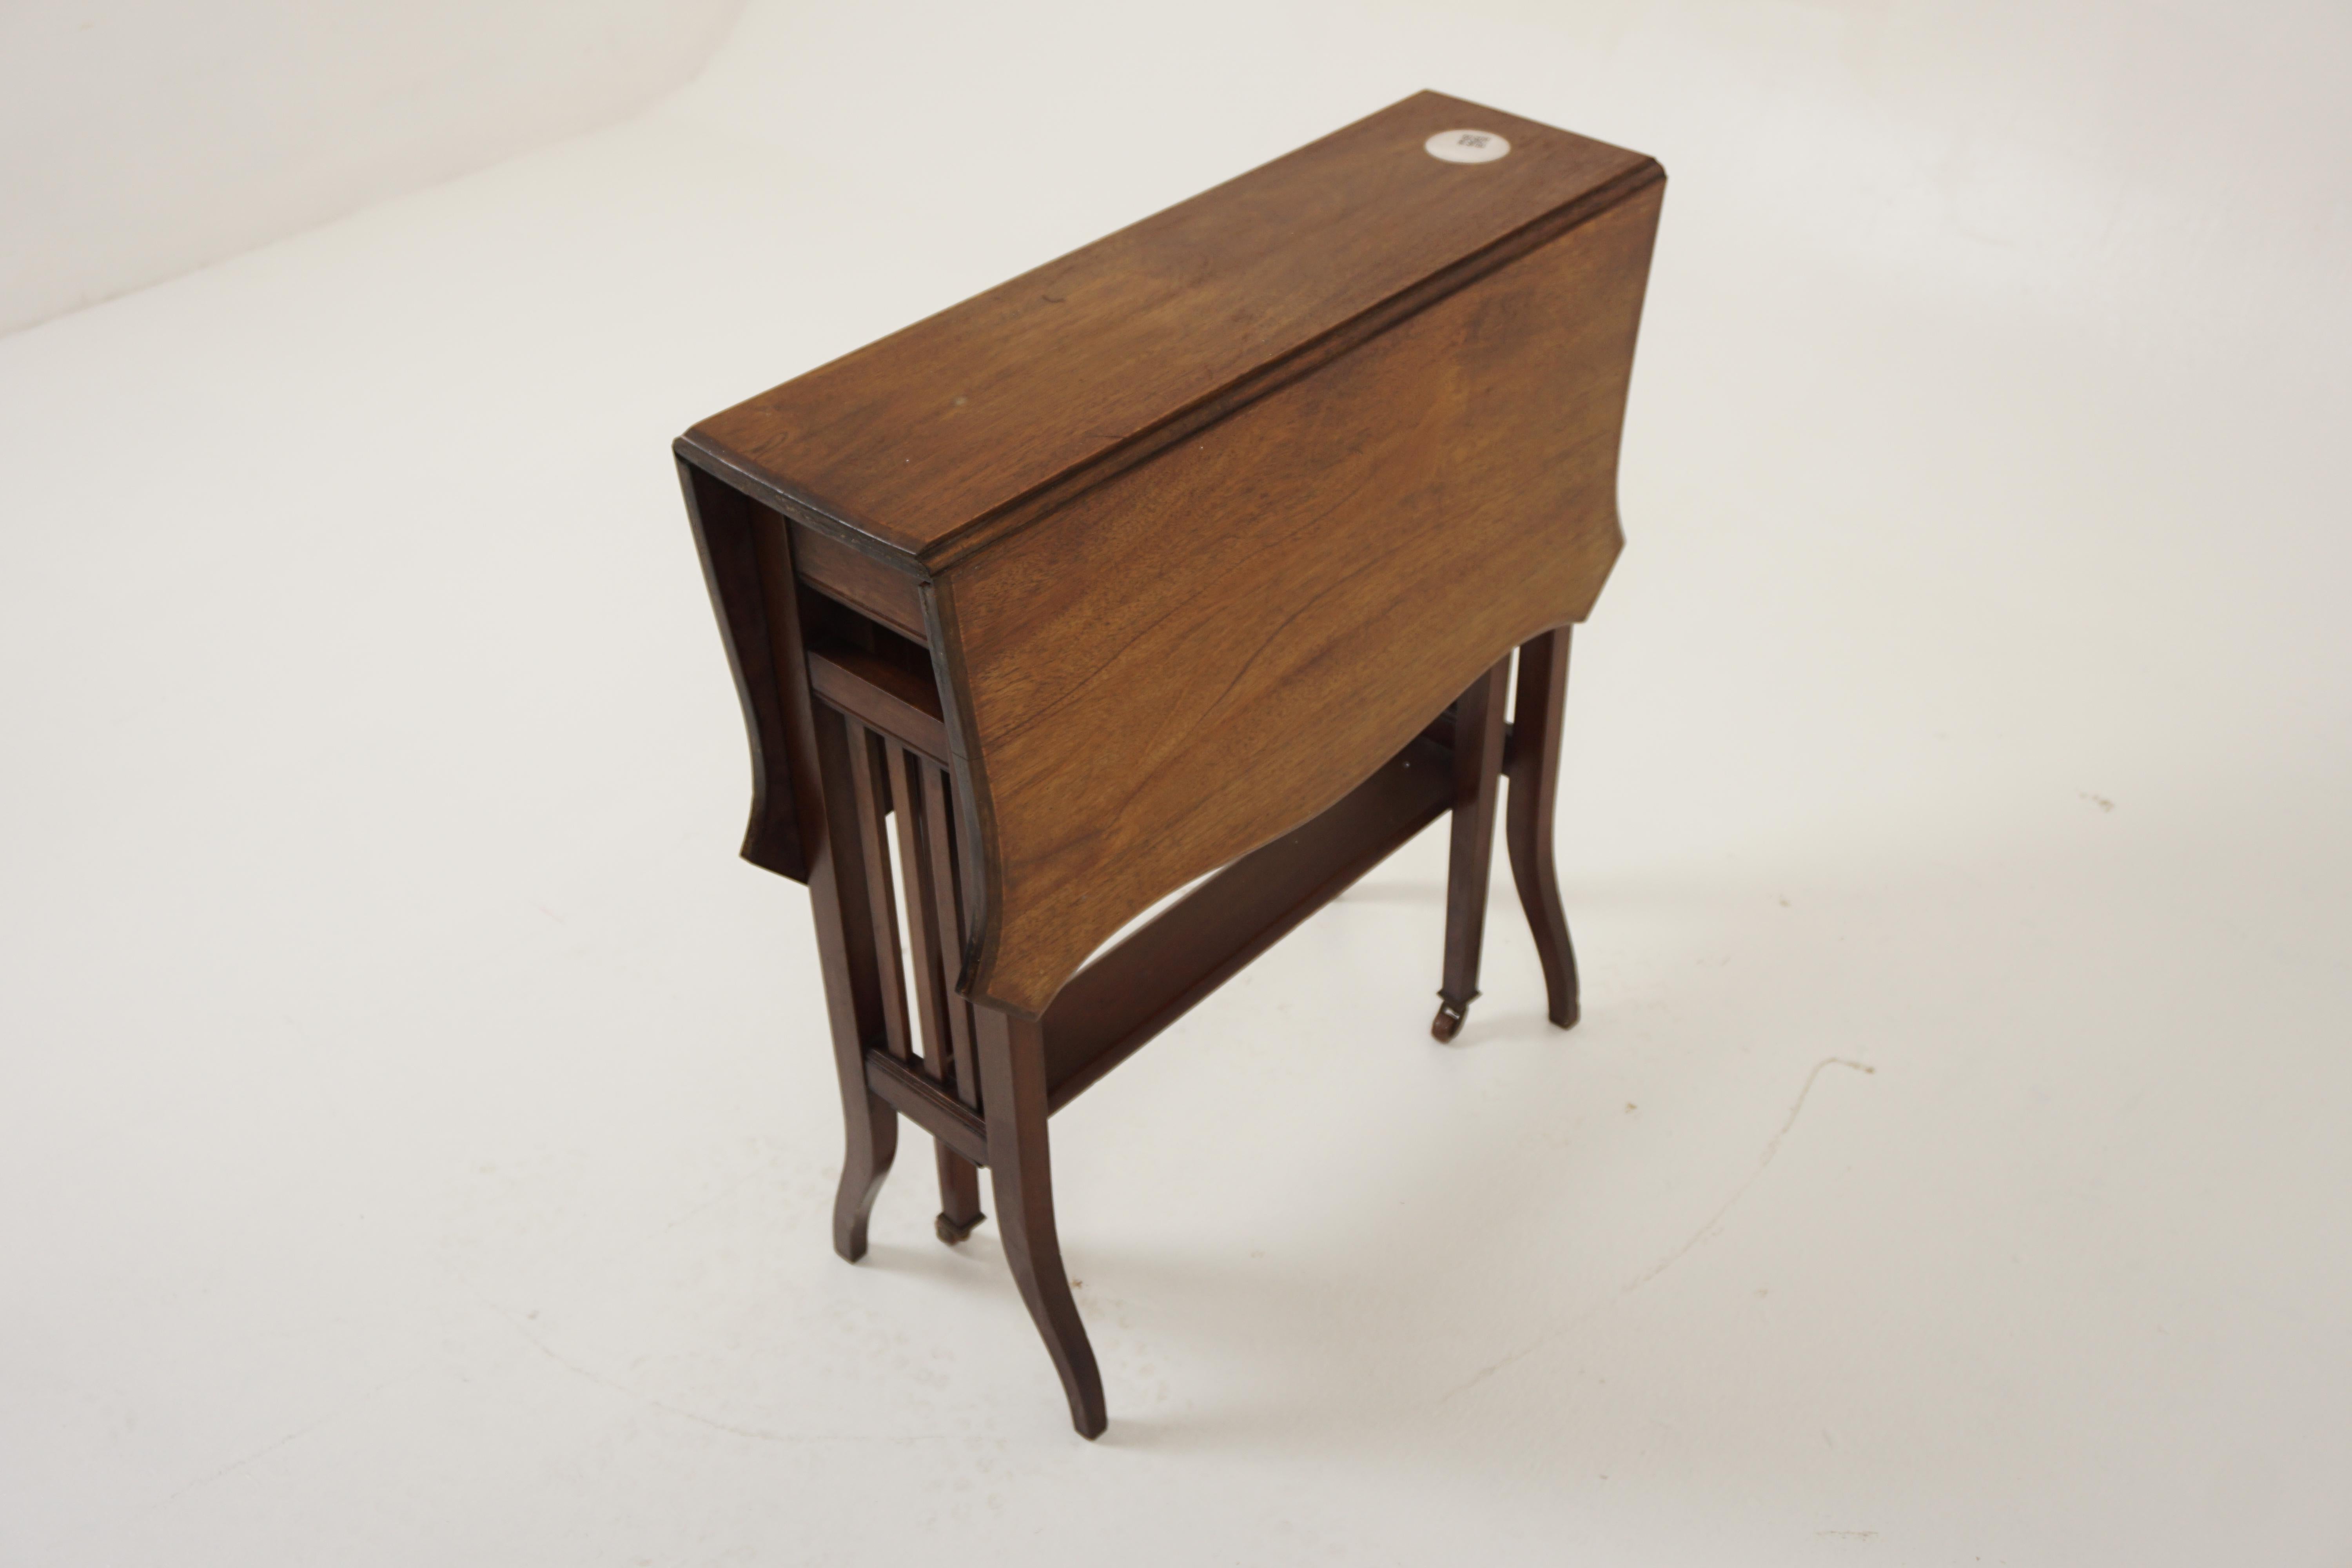 Antique Walnut Table, Sutherland Drop Leaf, Gateleg Side Table, Antique Furniture, Scotland 1920, H1079A

+ Scotland 1920
+ Solid Walnut
+ Original Finish
+ The table has a rectangular shape when fully extended
+ With serpentine edges and canted